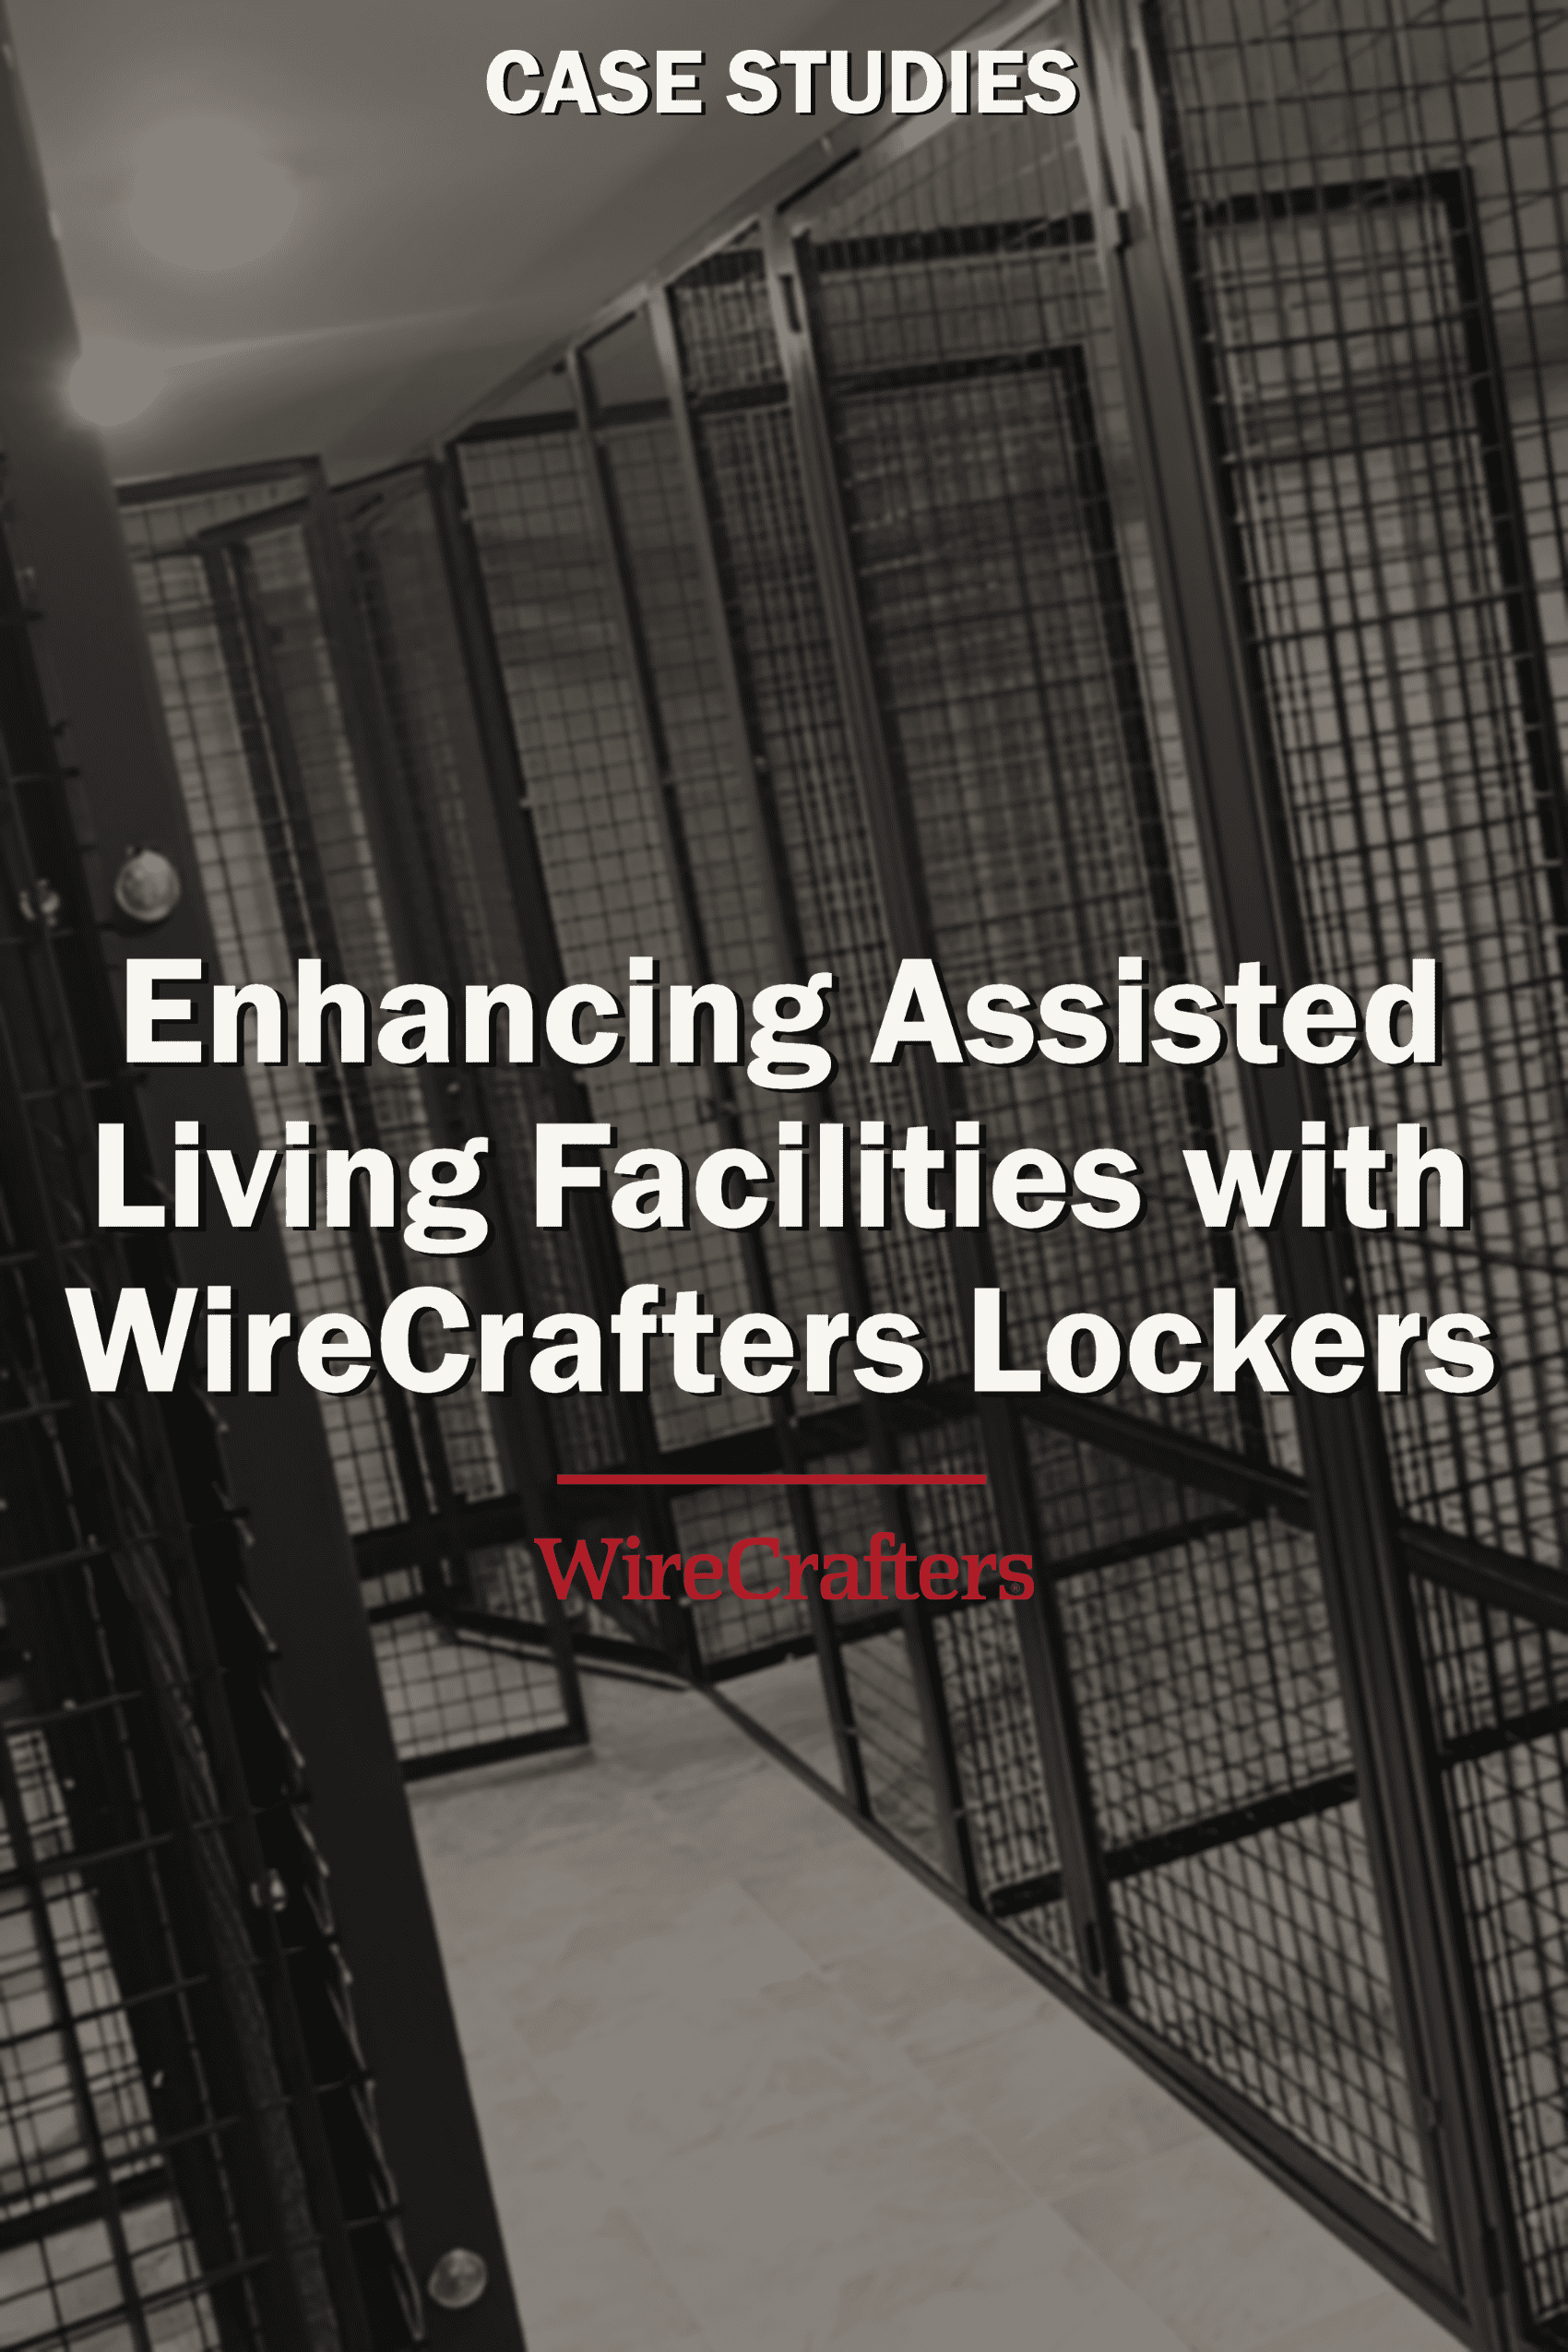 Enhancing Assisted Living Facilities with WireCrafters Lockers